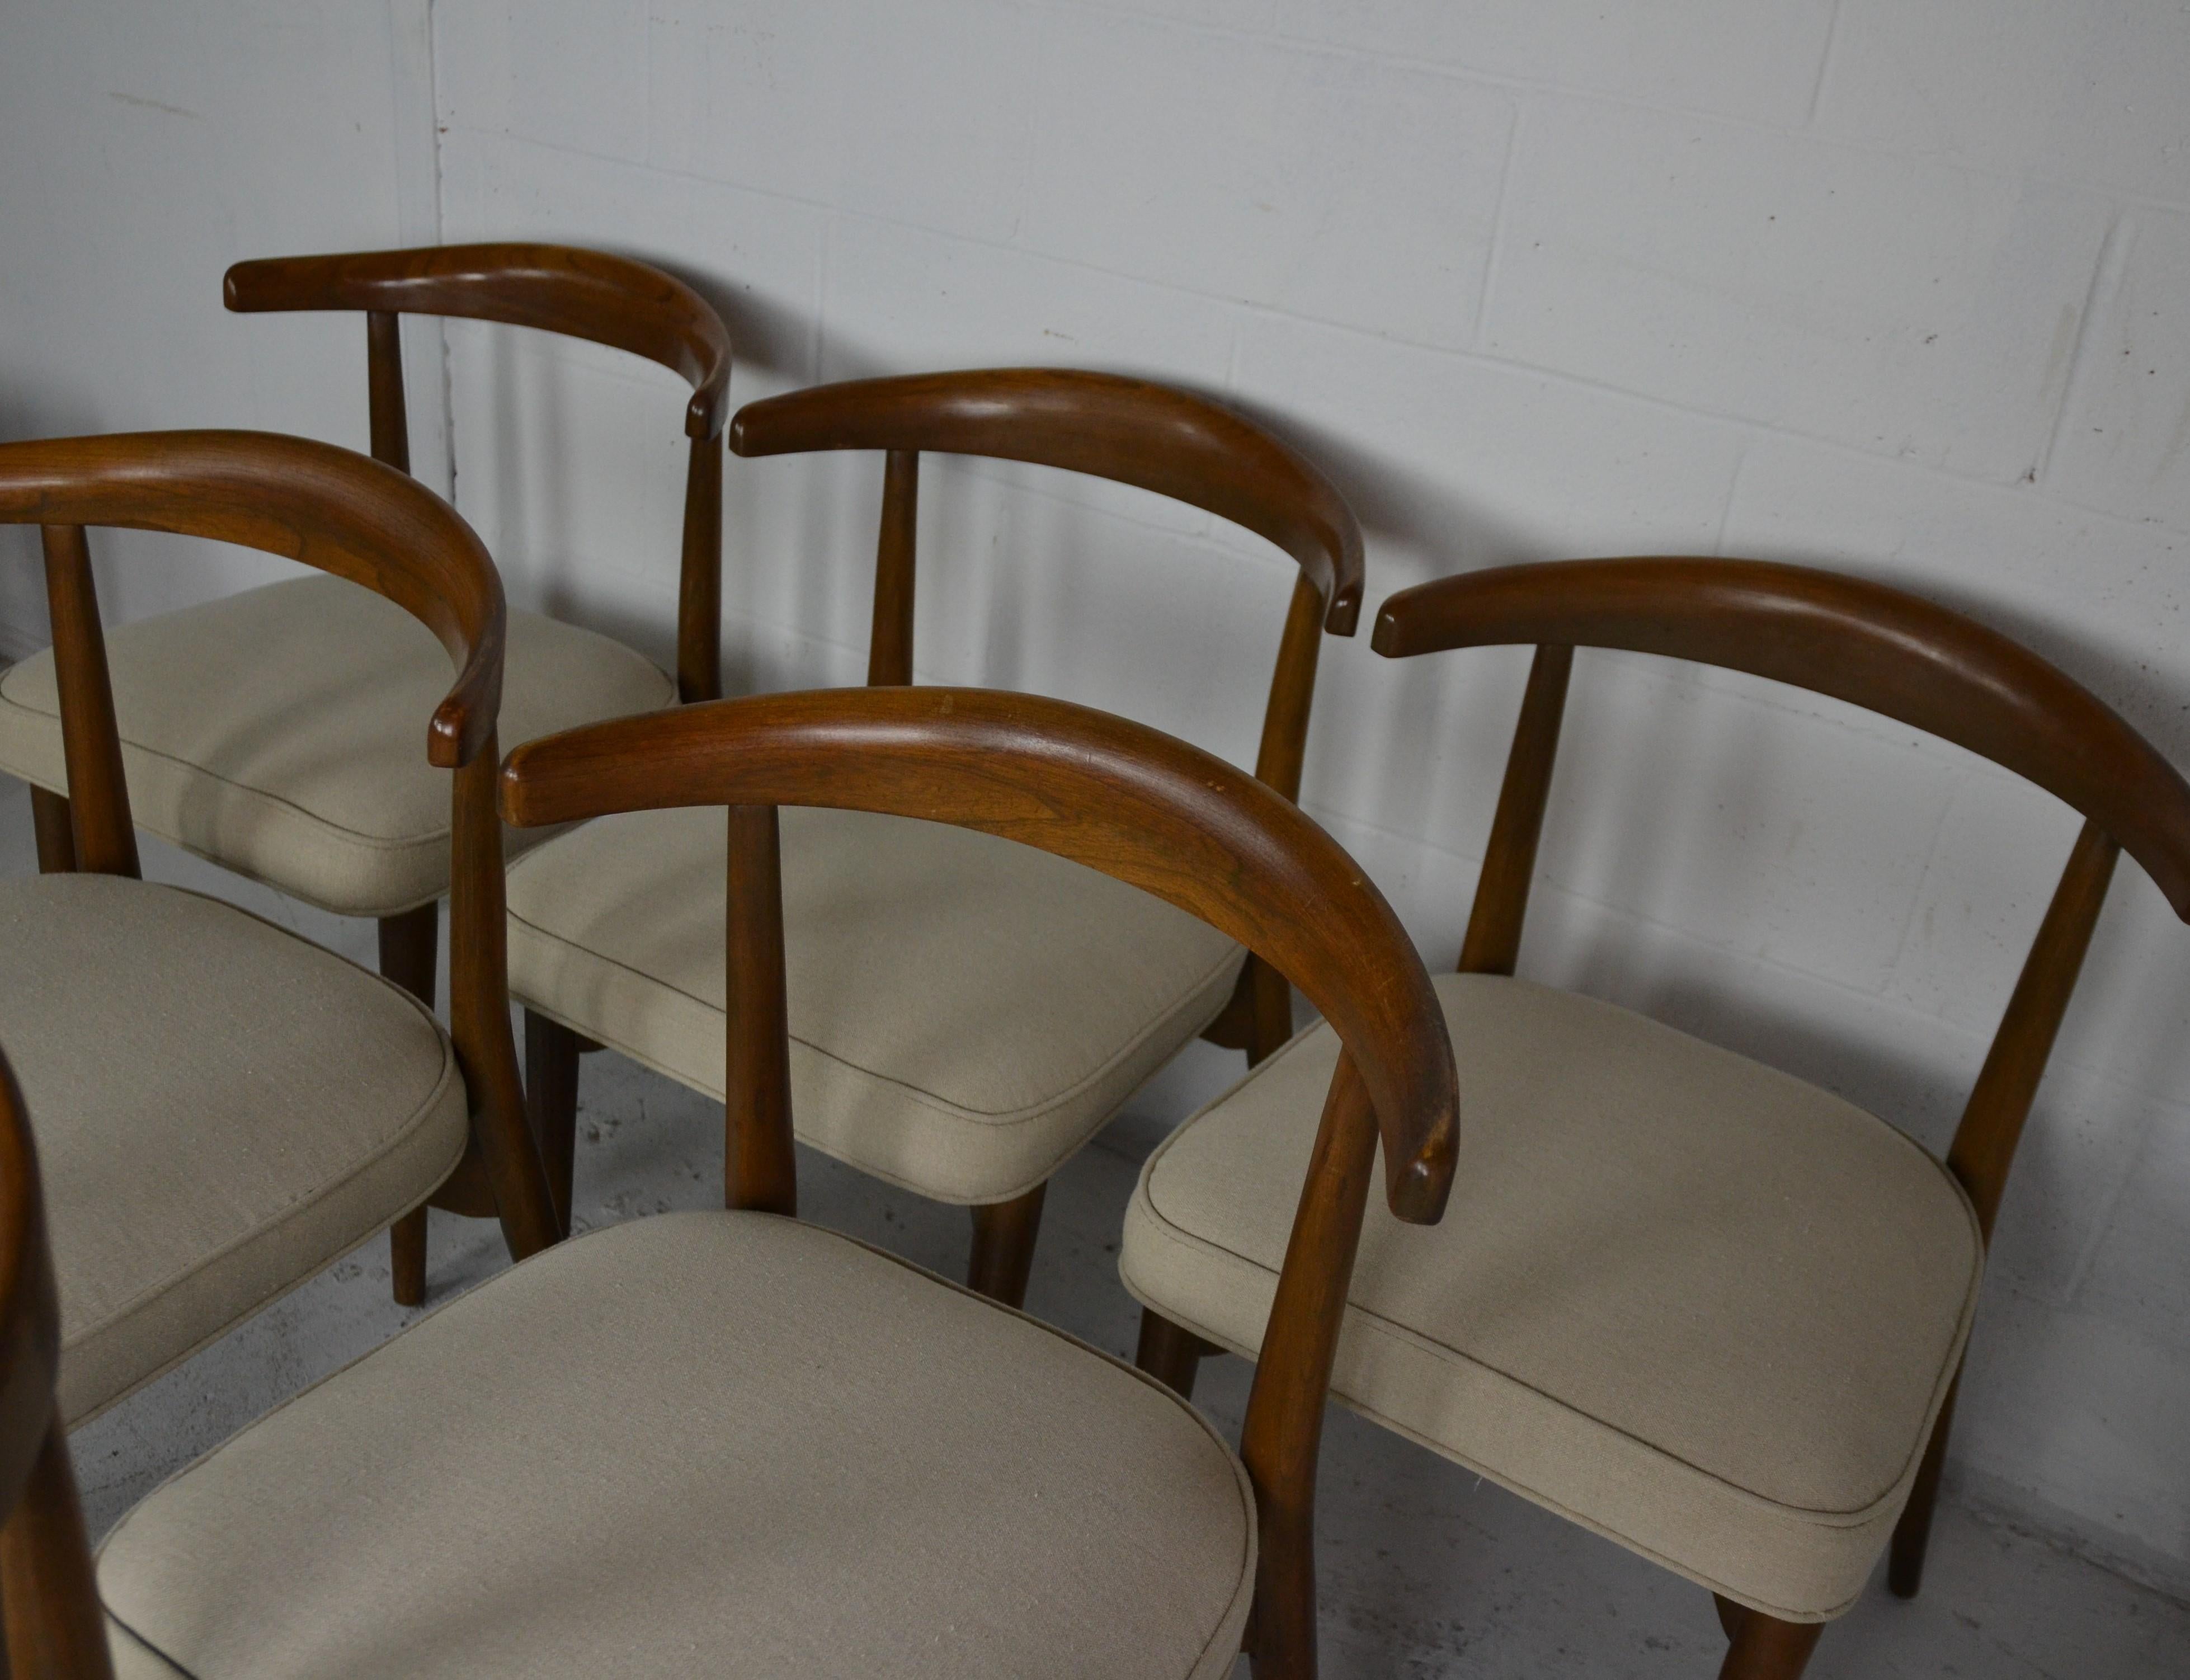 American walnut frame midcentury dining chairs. Seats are cover in a neutral fabric.